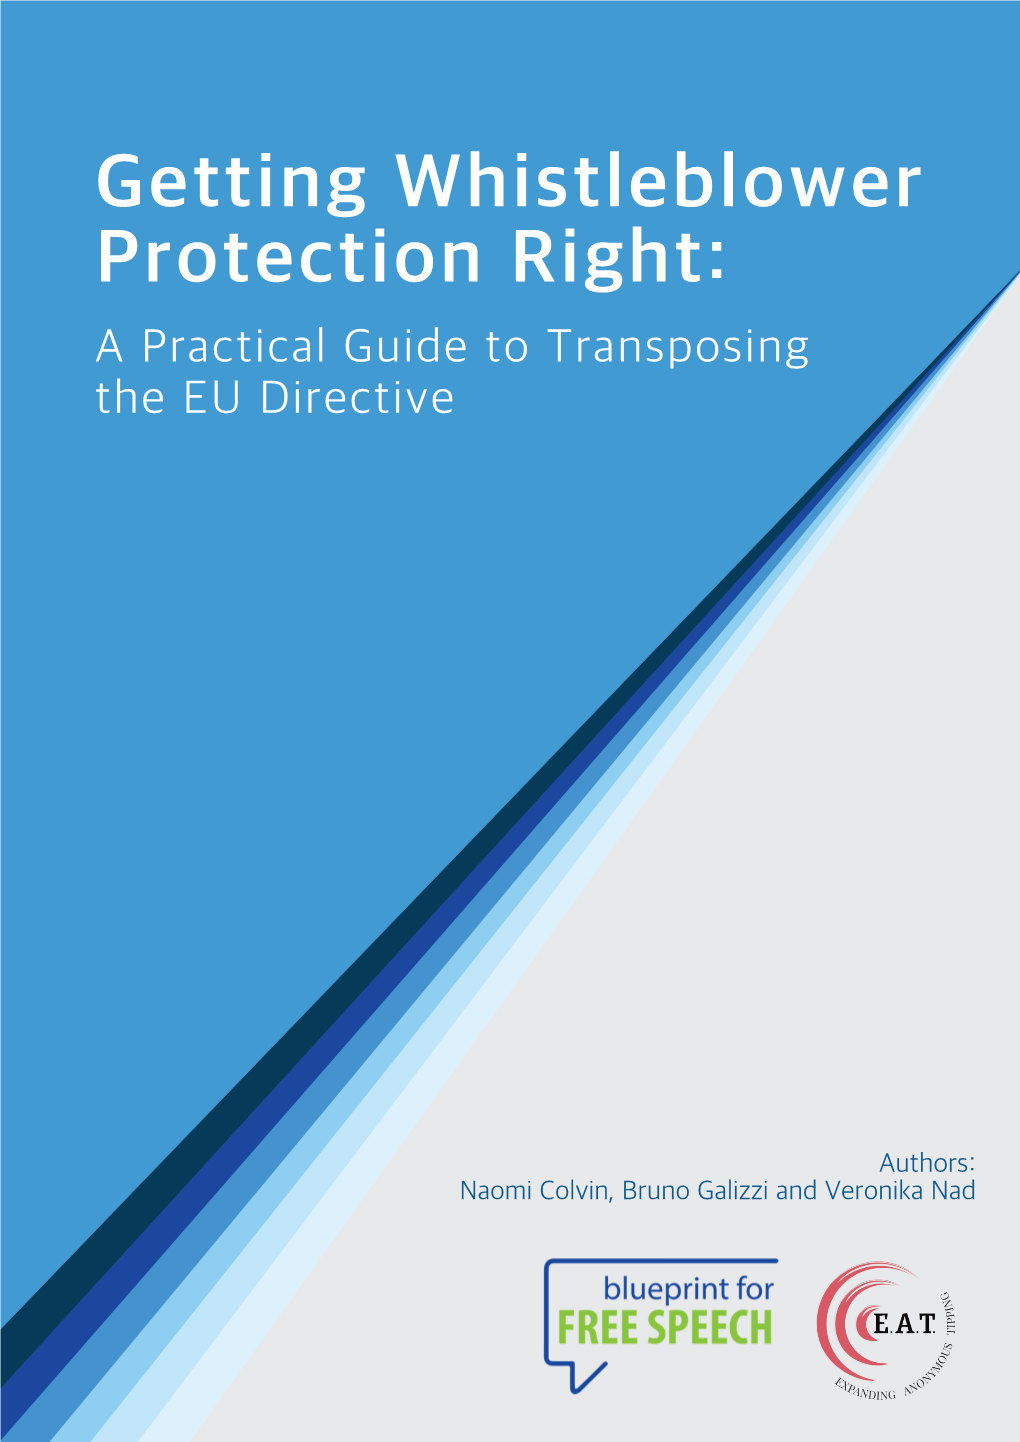 Getting Whistleblower Protection Right: a Practical Guide to Transposing the EU Directive